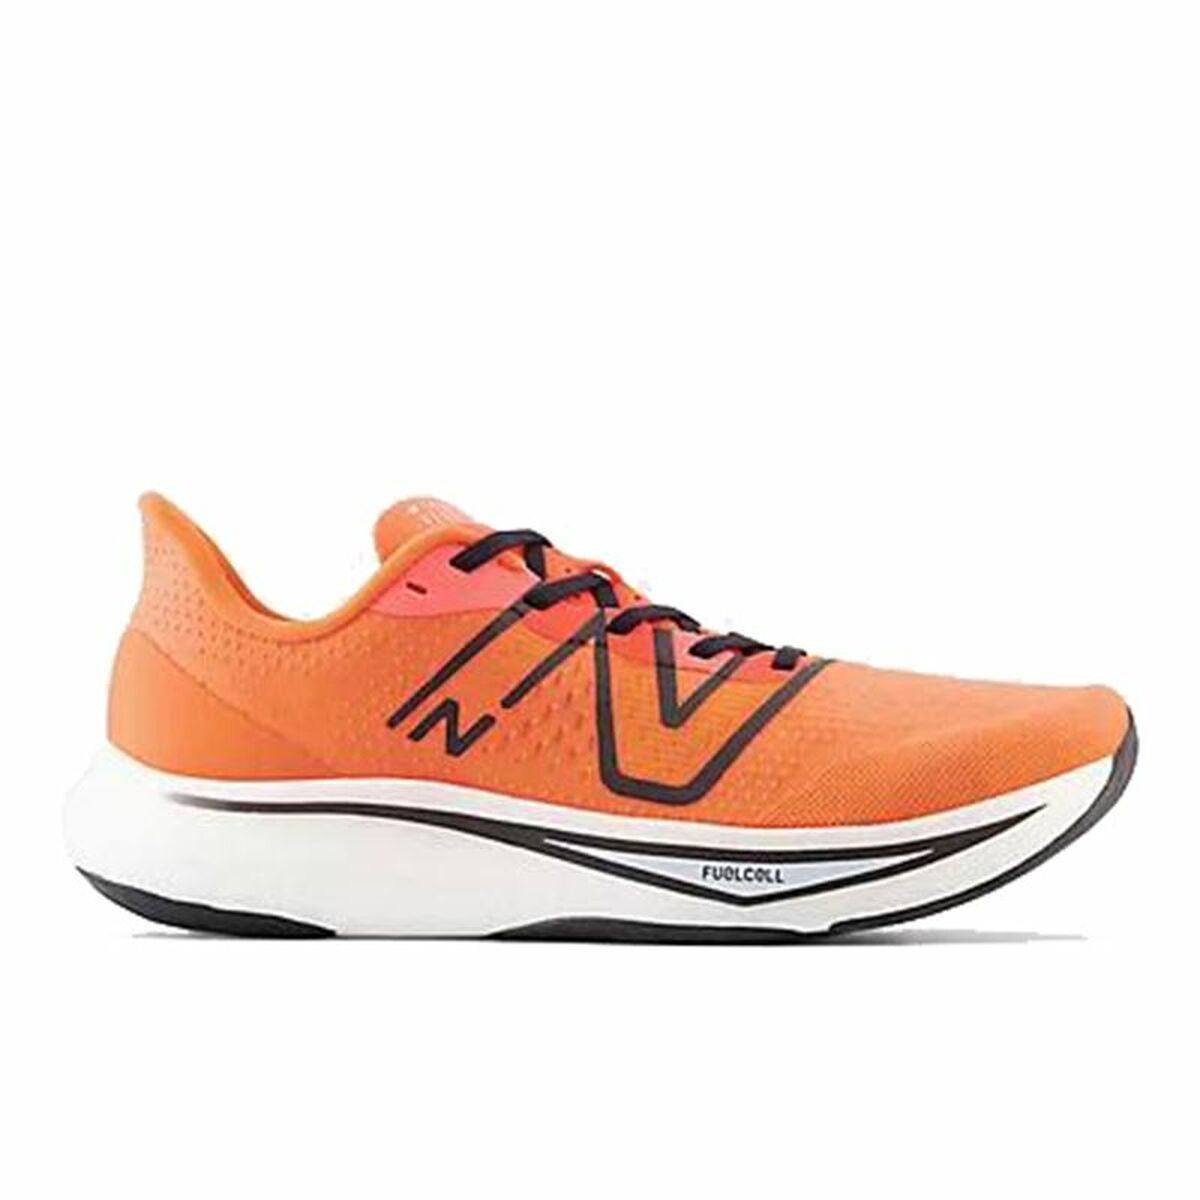 Chaussures de Running pour Adultes New Balance FuelCell Rebel Homme Orange